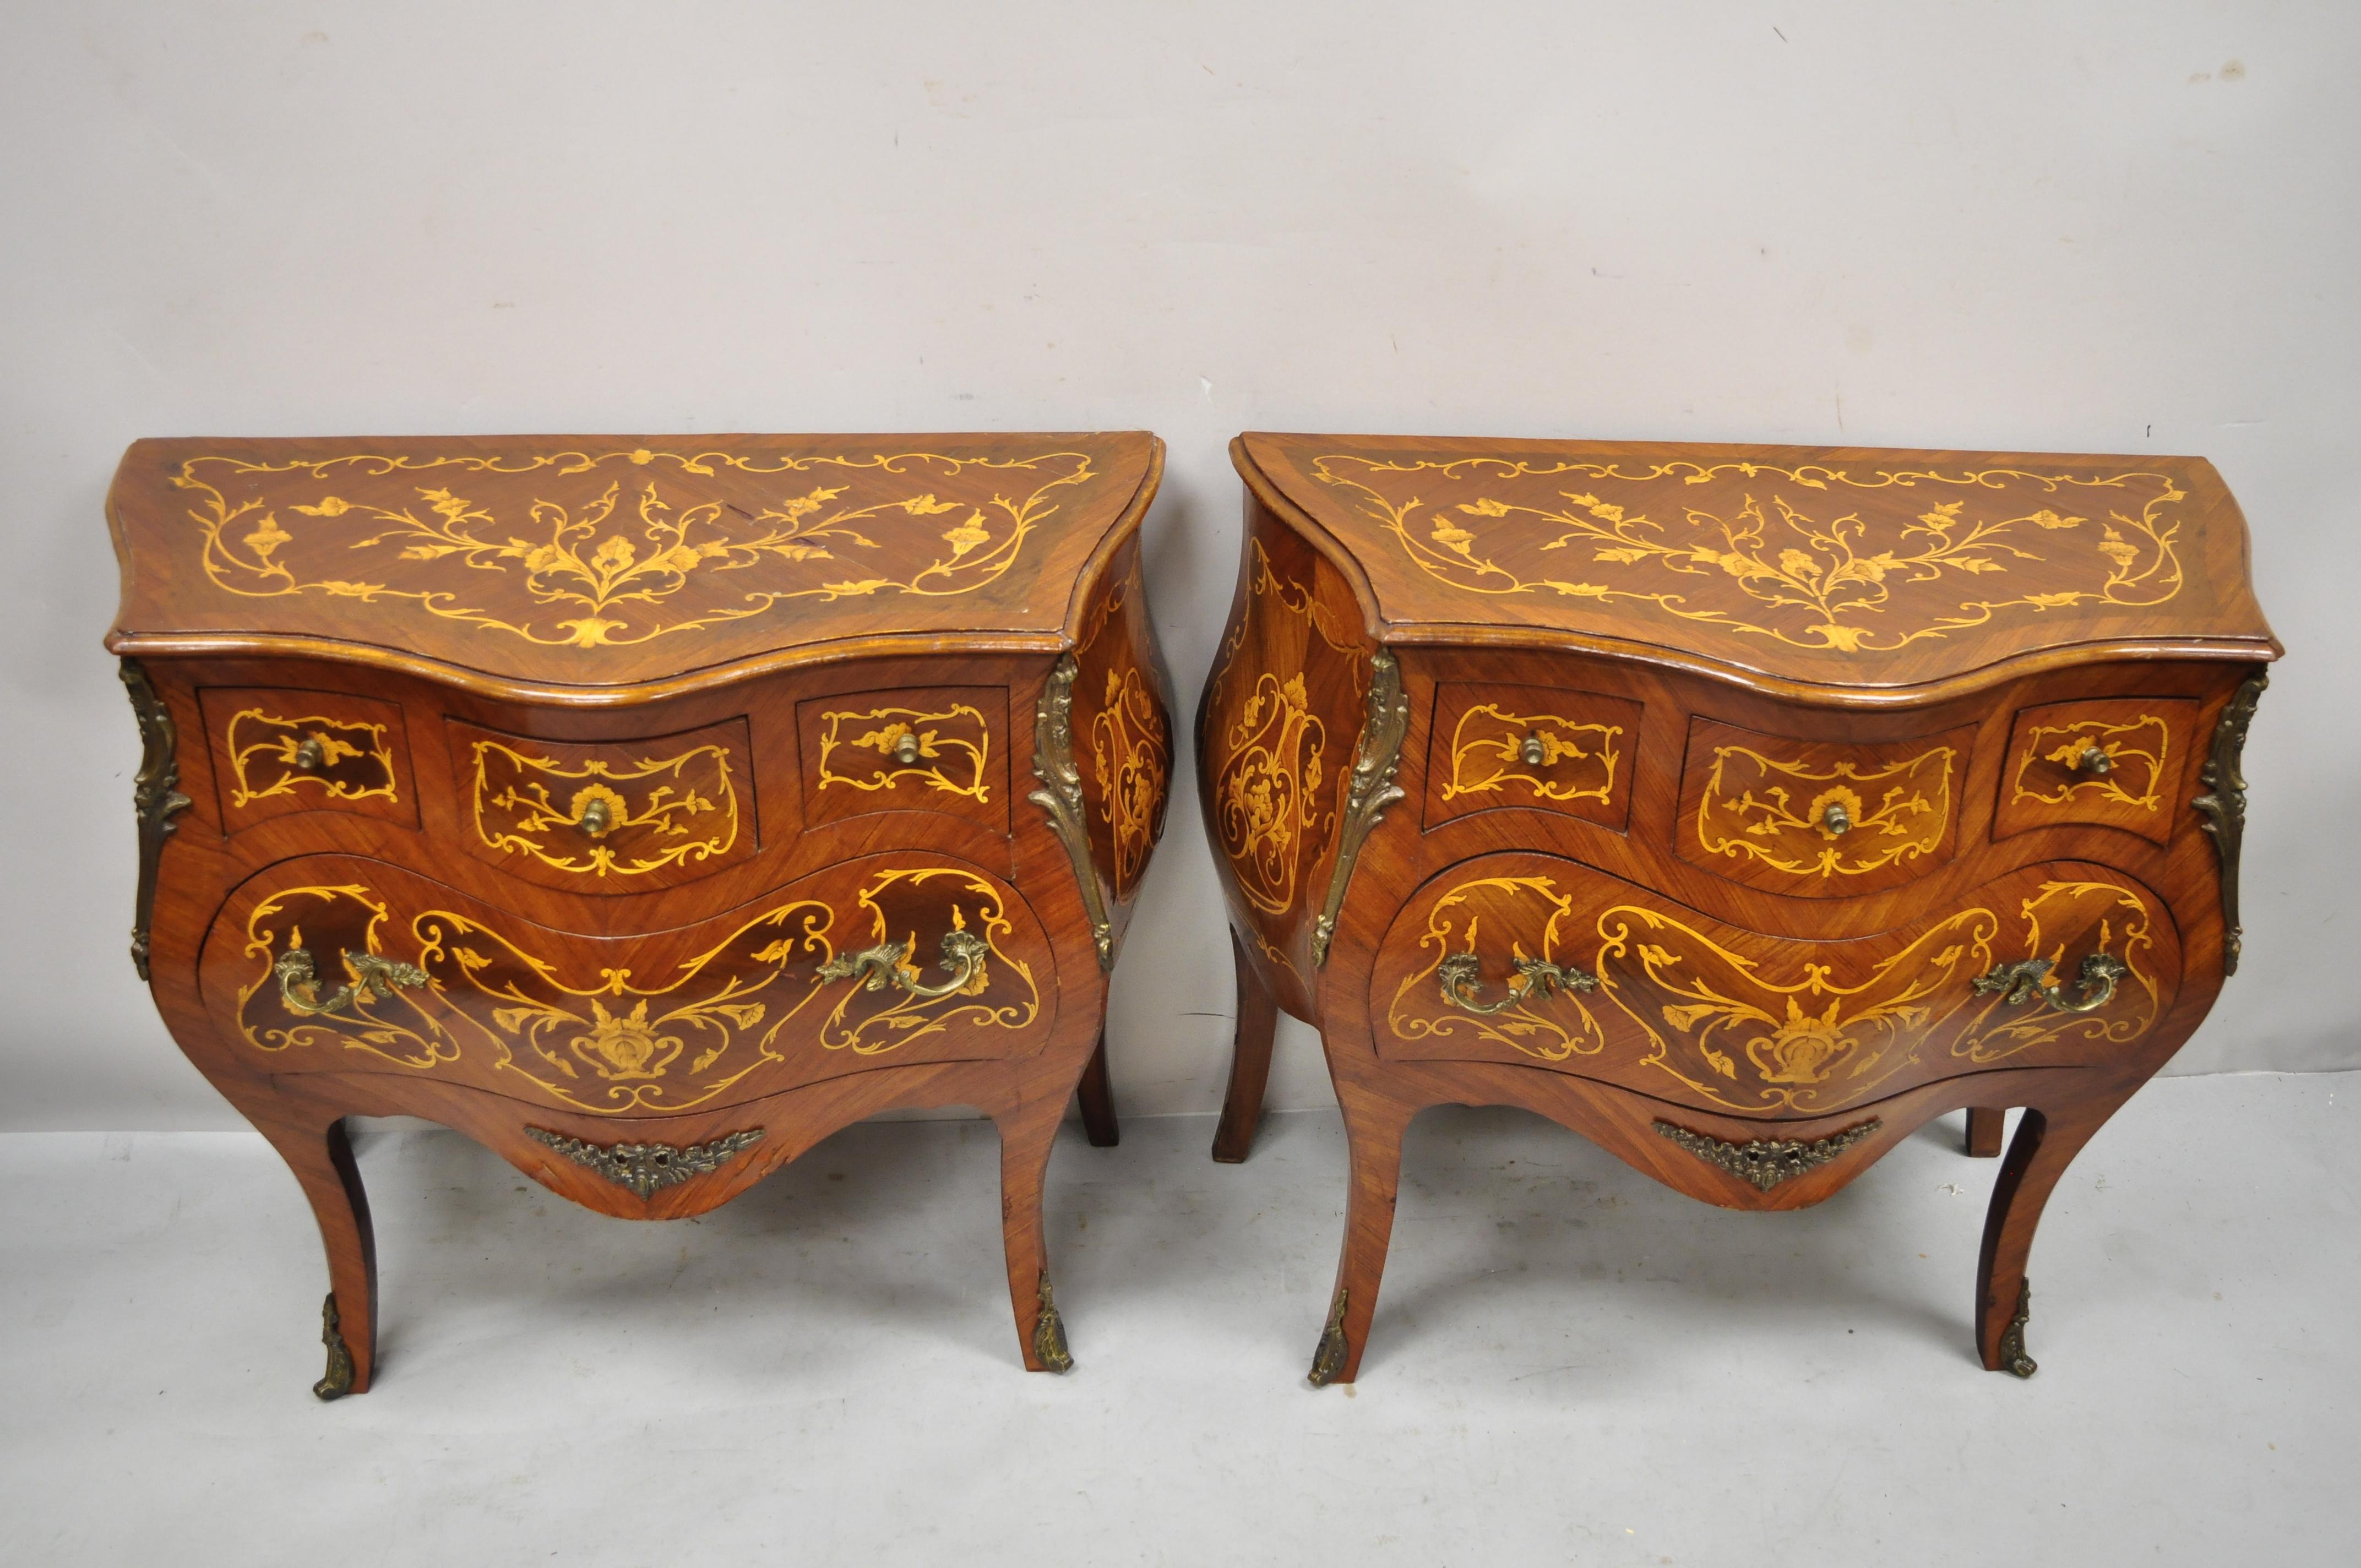 French Louis XV style Marquetry Inlay bombe commode chest bedside table - a pair. Item features bombe form, marquetry inlay throughout, 4 drawers, cabriole legs, great style and form. Circa late 20th century. Measurements: 30.5